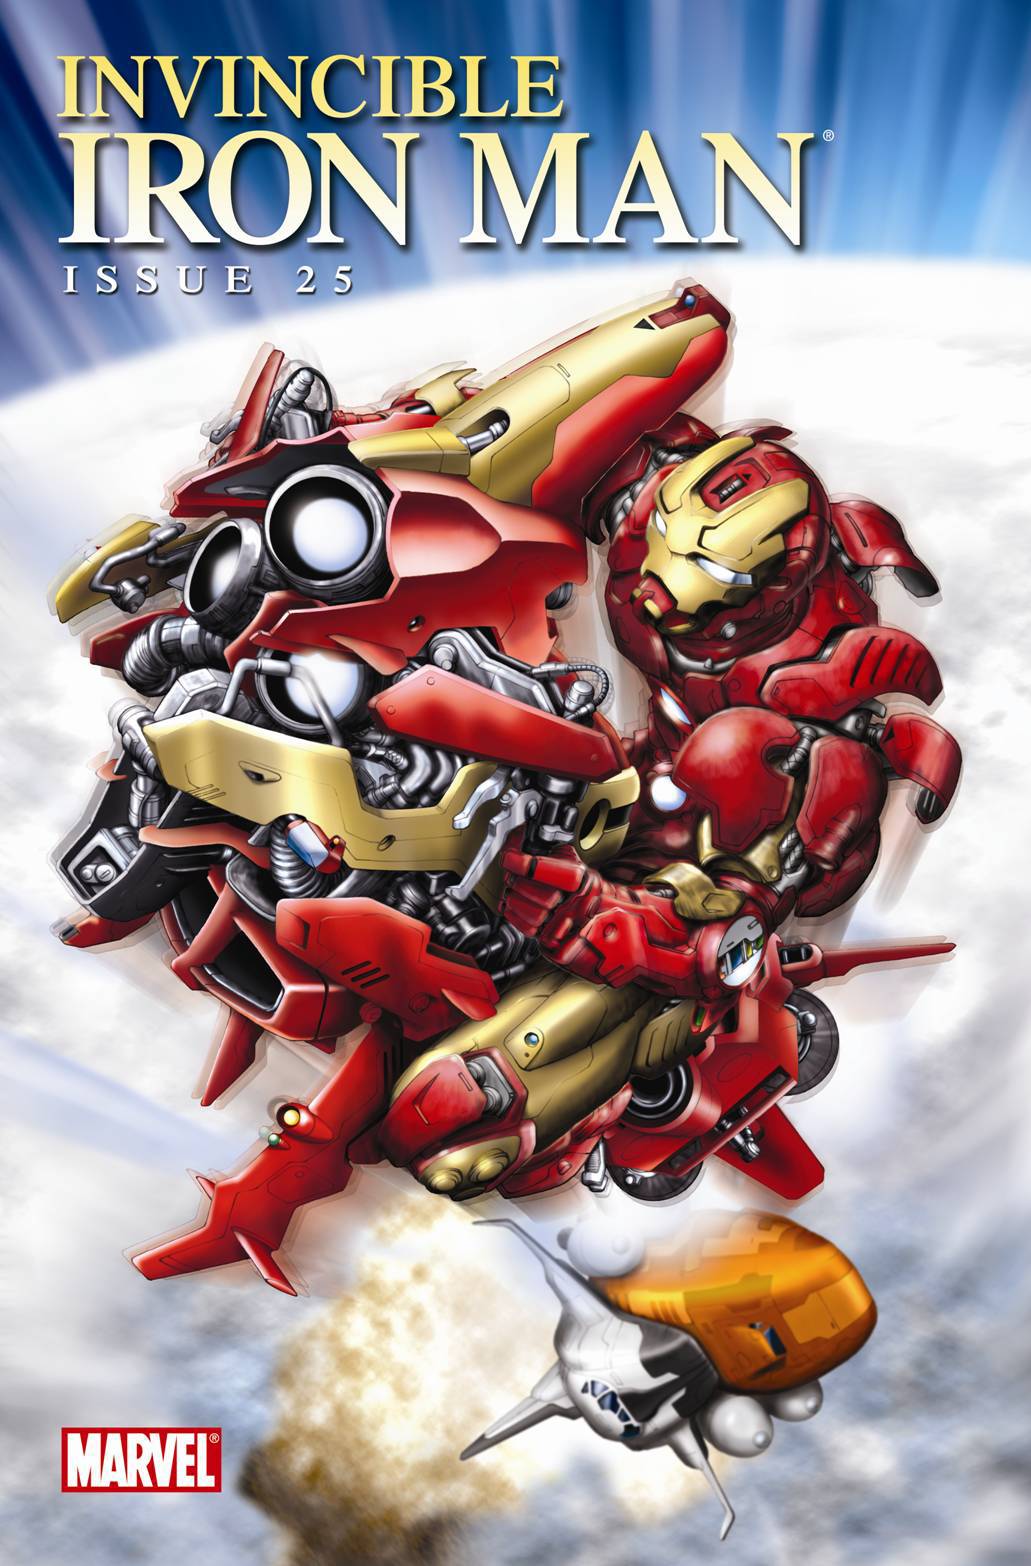 Invincible Iron Man #25 (Iron Man by Design Variant) (2008)